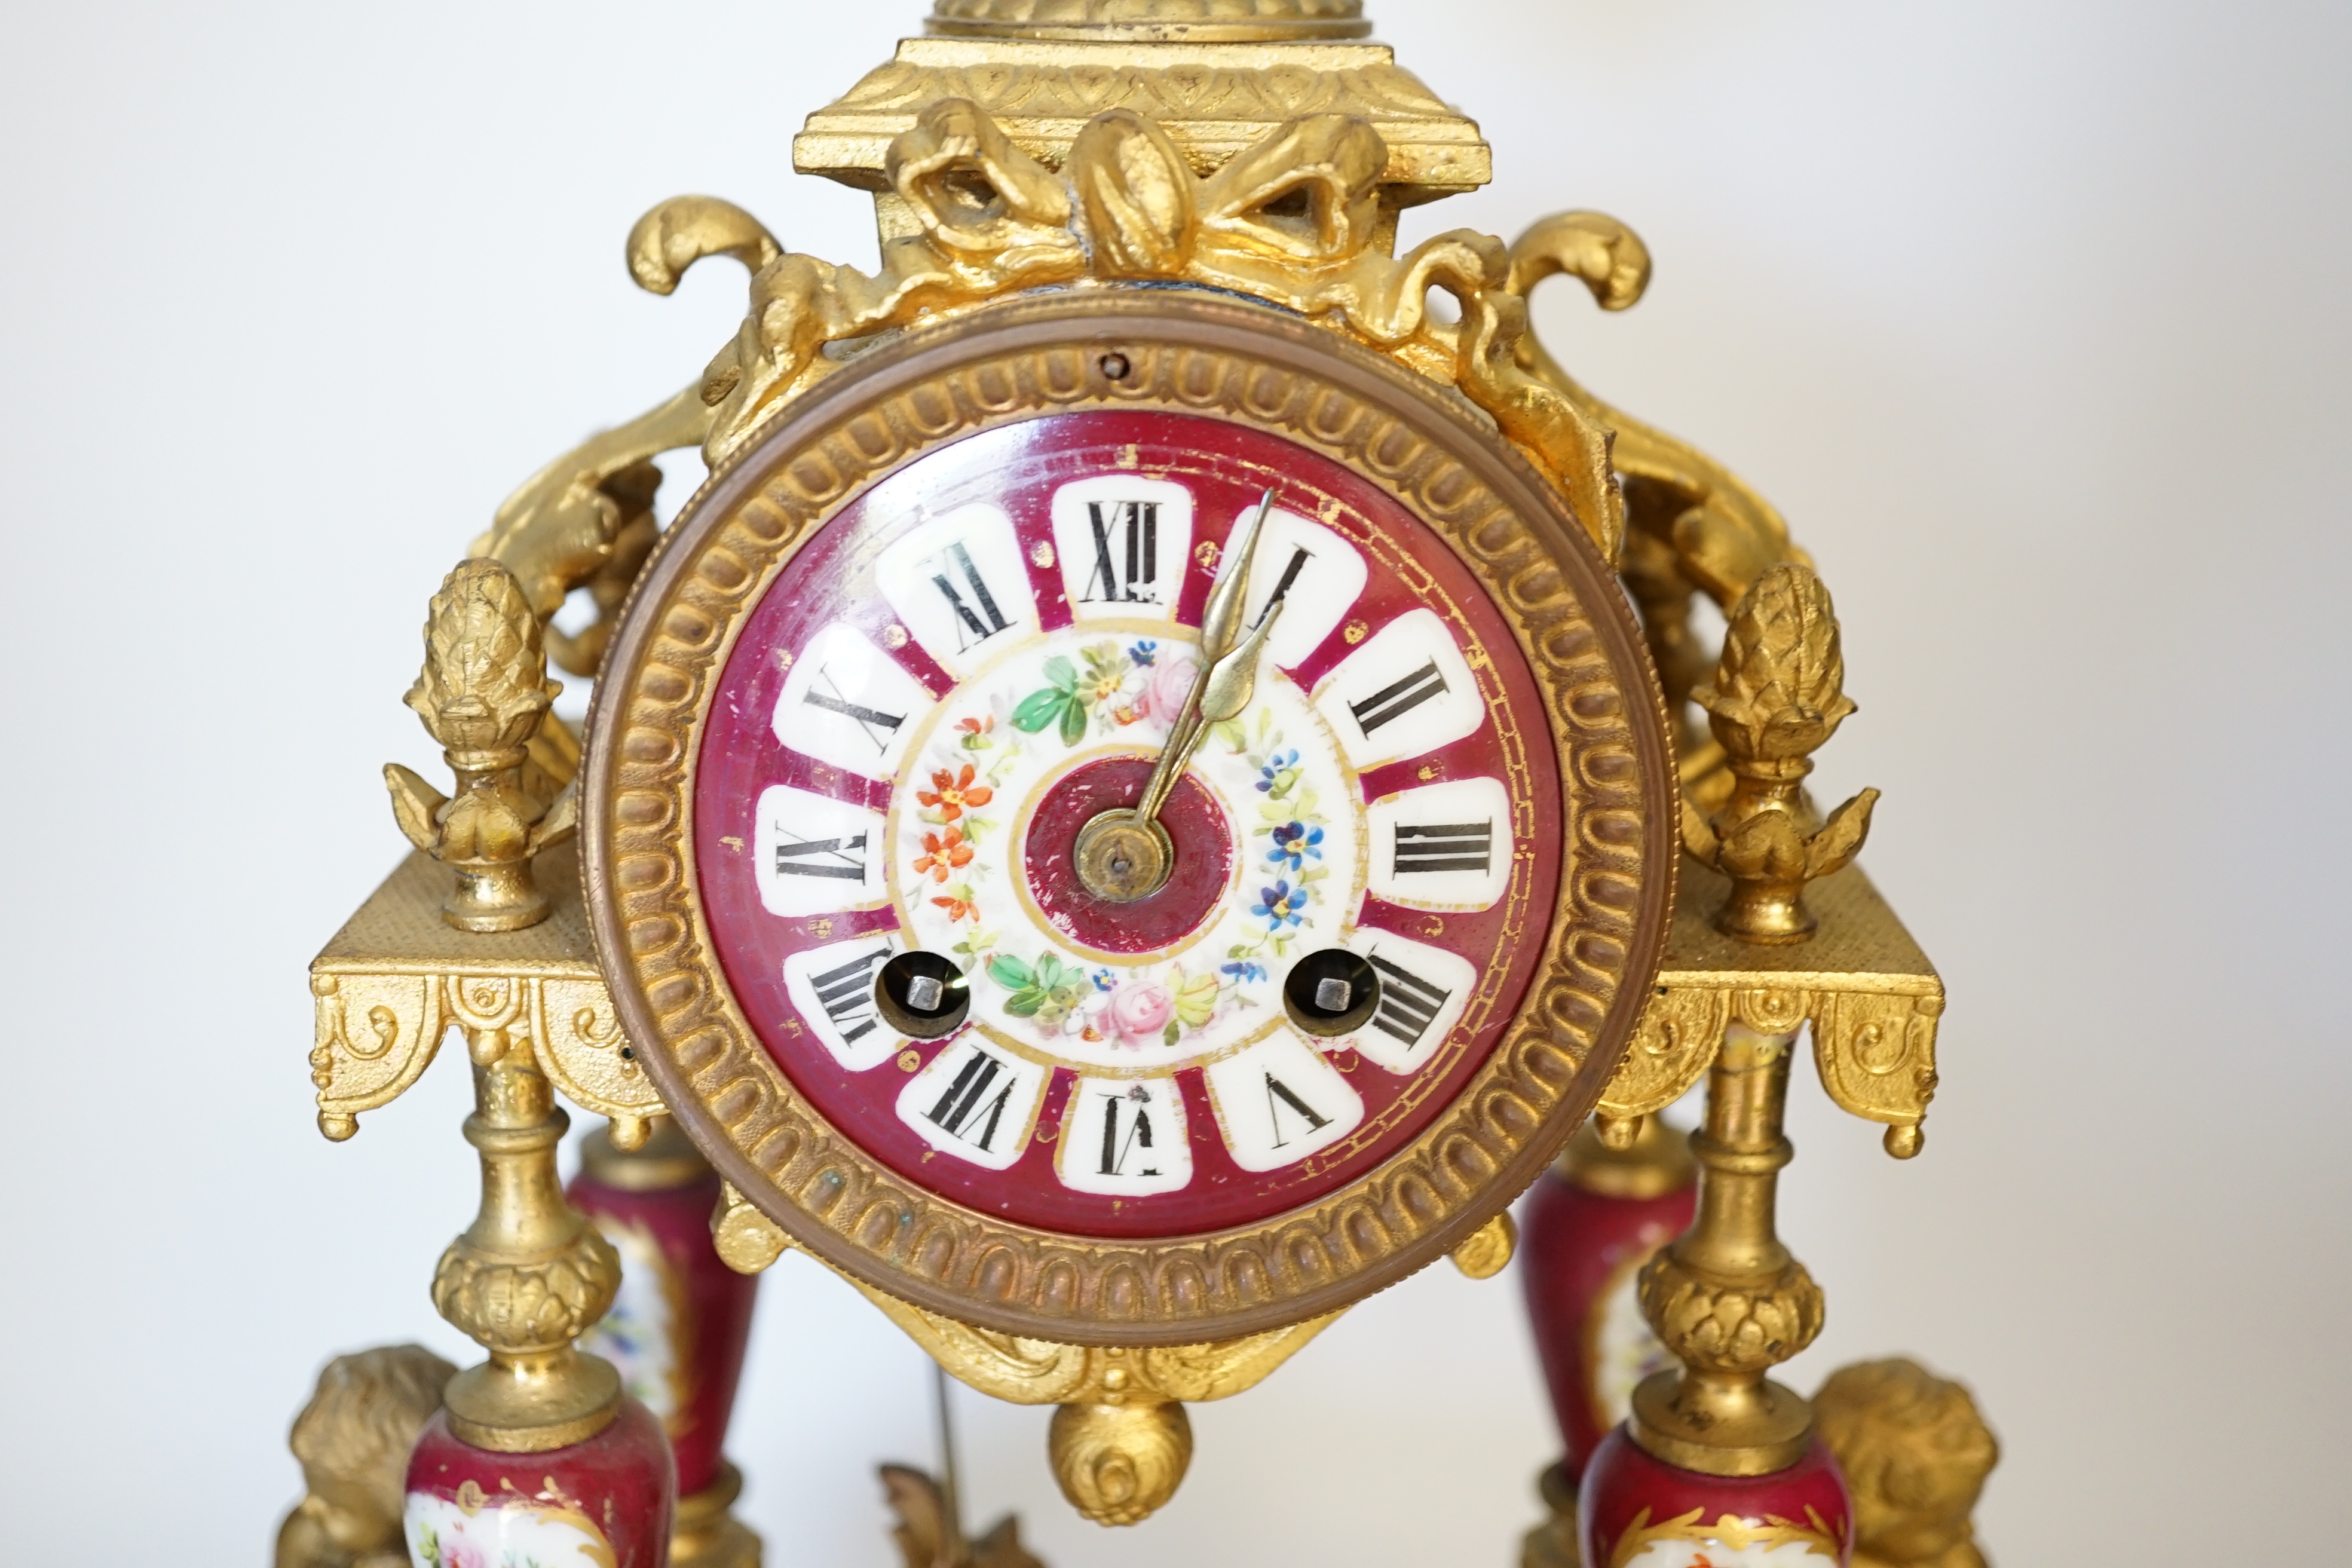 A late 19th century gilt metal and porcelain mounted mantel clock with associated stand, key and pendulum, 46cm. Condition - good to fair, not tested